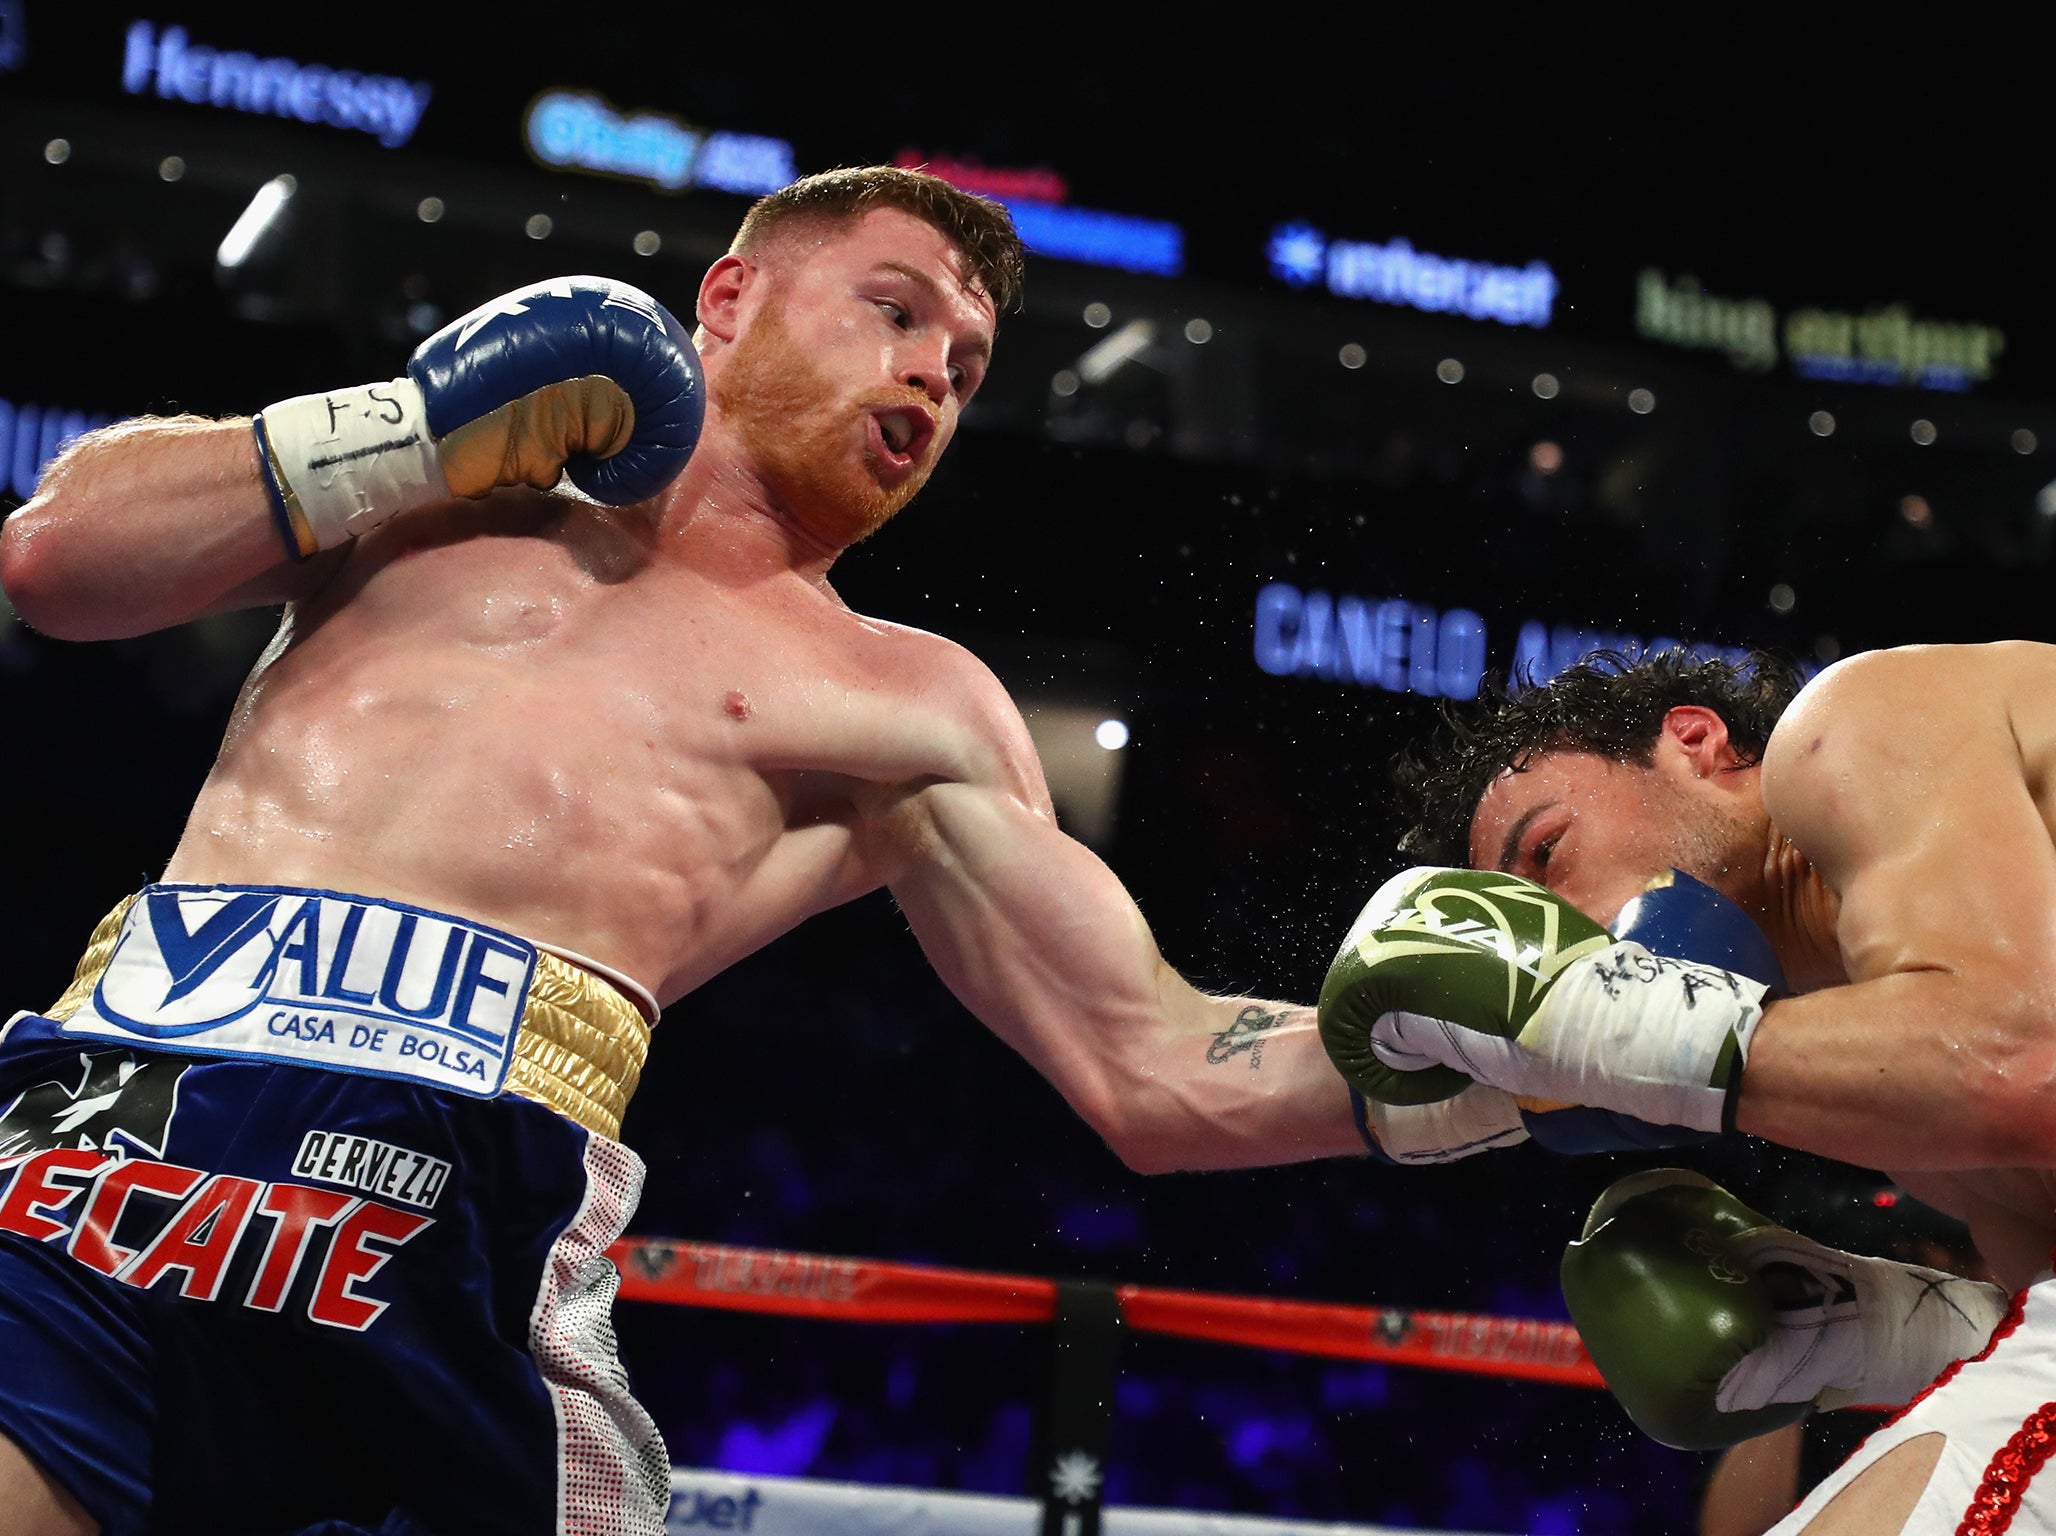 Canelo failed two drug tests